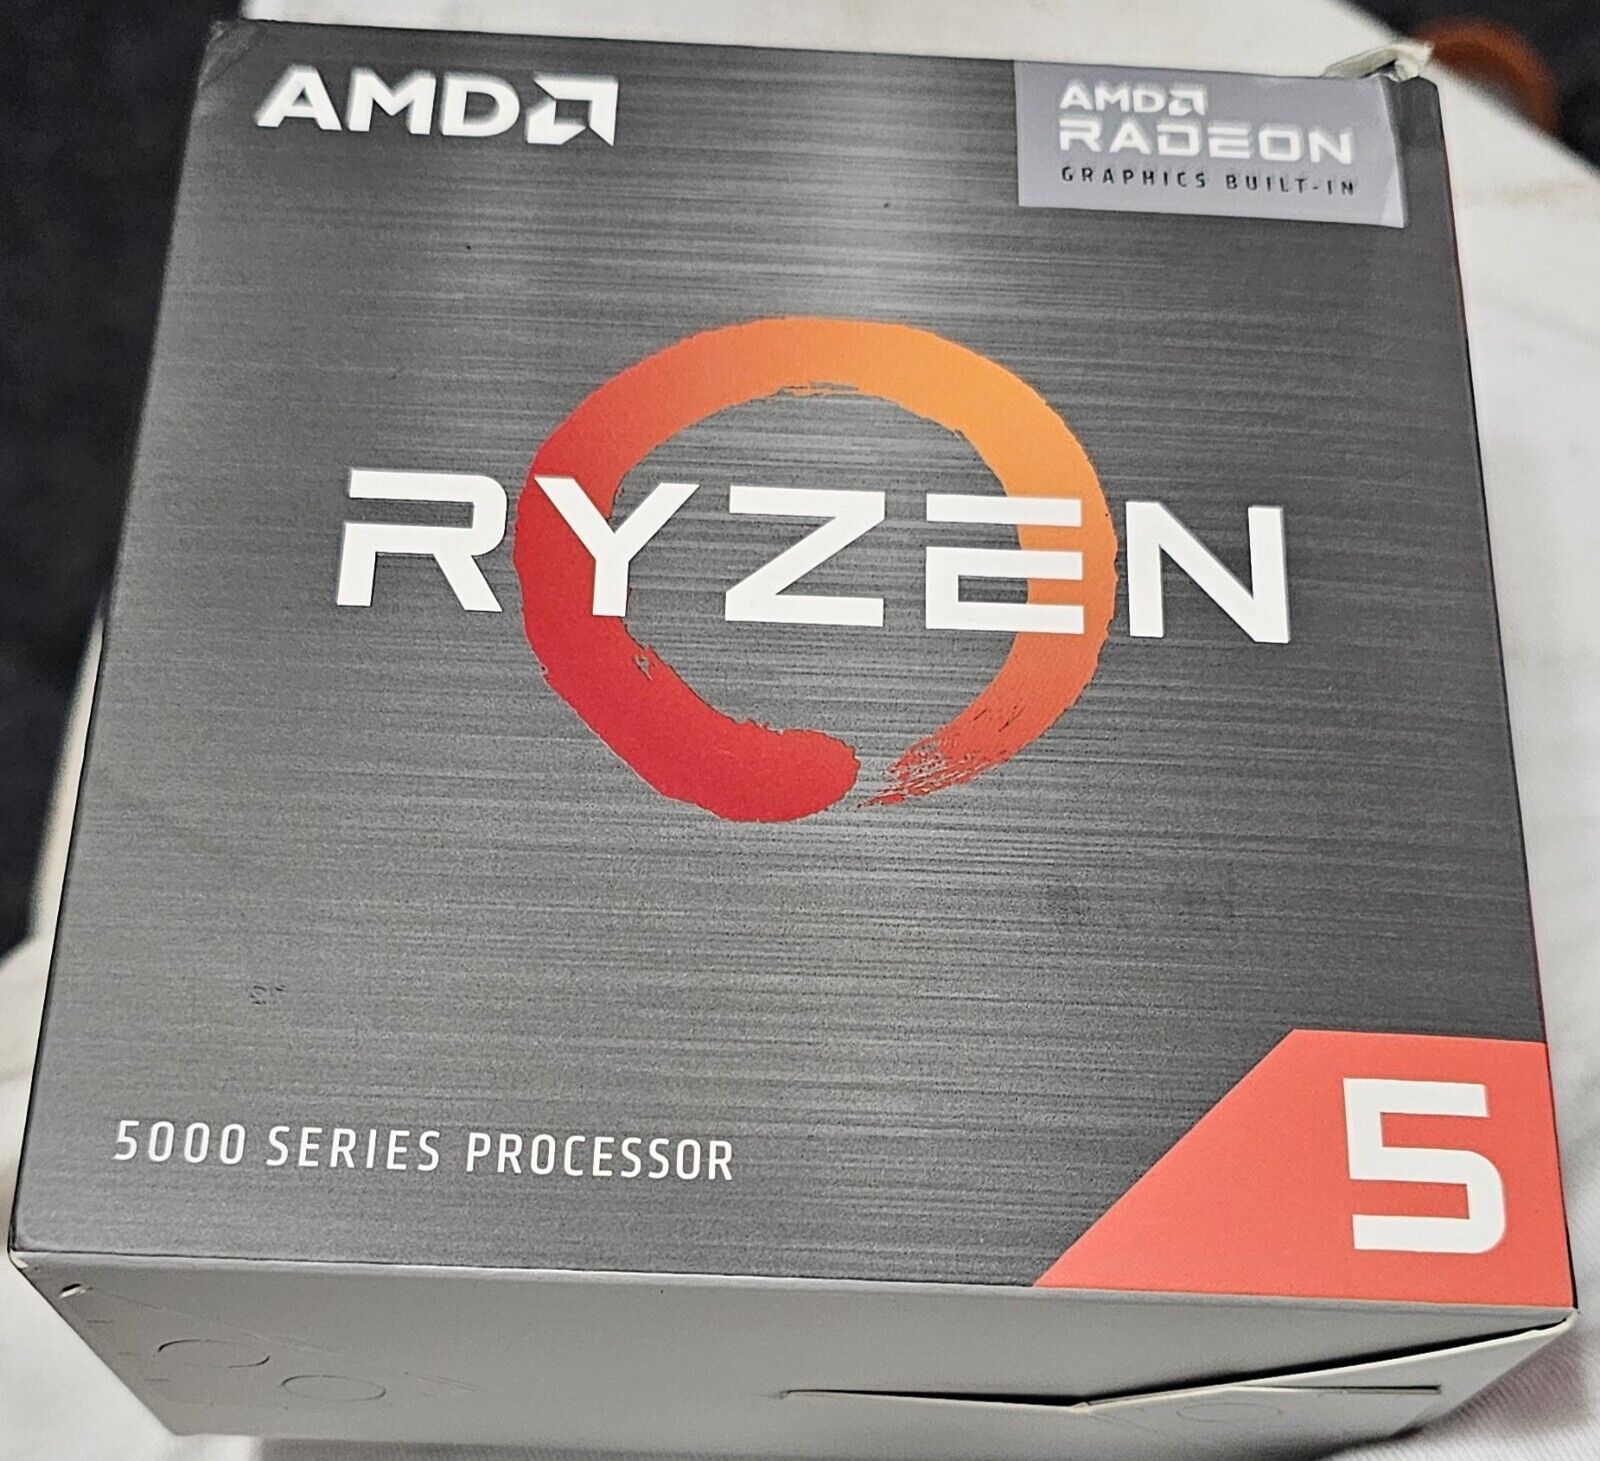 Amd Ryzen 5 5500GT CPU With Radeon GraphicsFactory Sealed Base3.6GhzMax 4.4Ghz